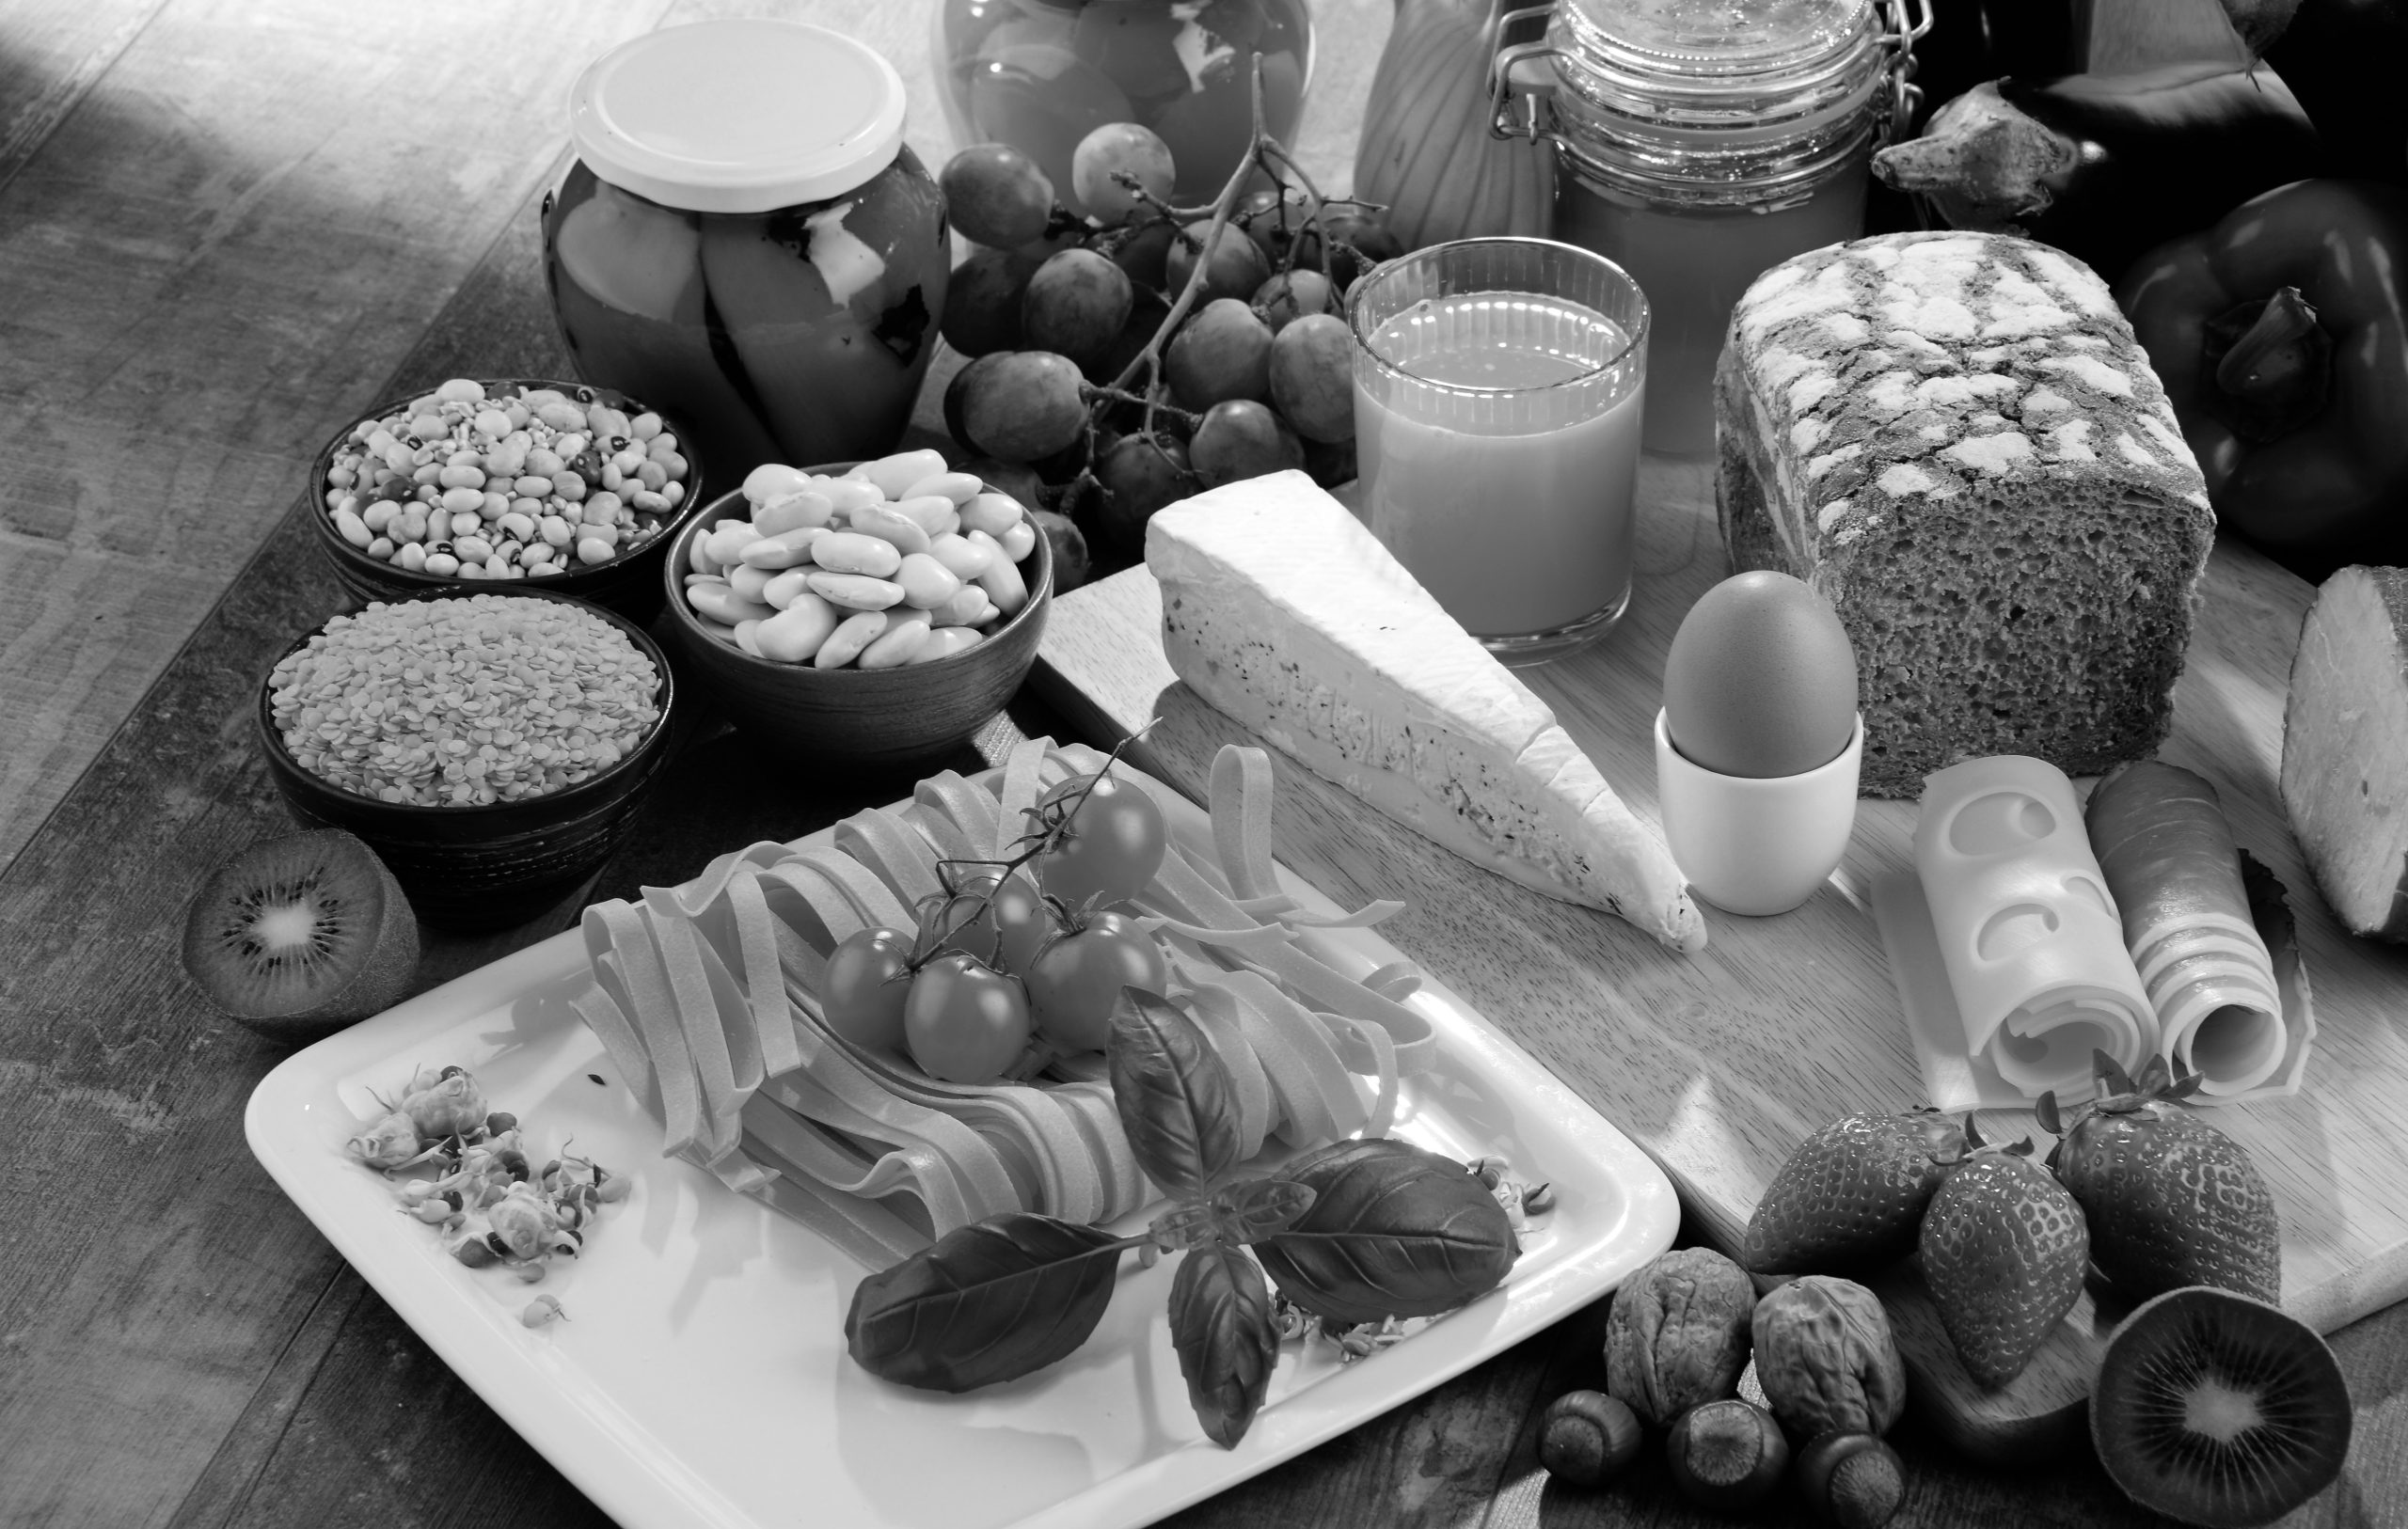 Composition,With,Variety,Of,Organic,Food,Products,On,Kitchen,Table